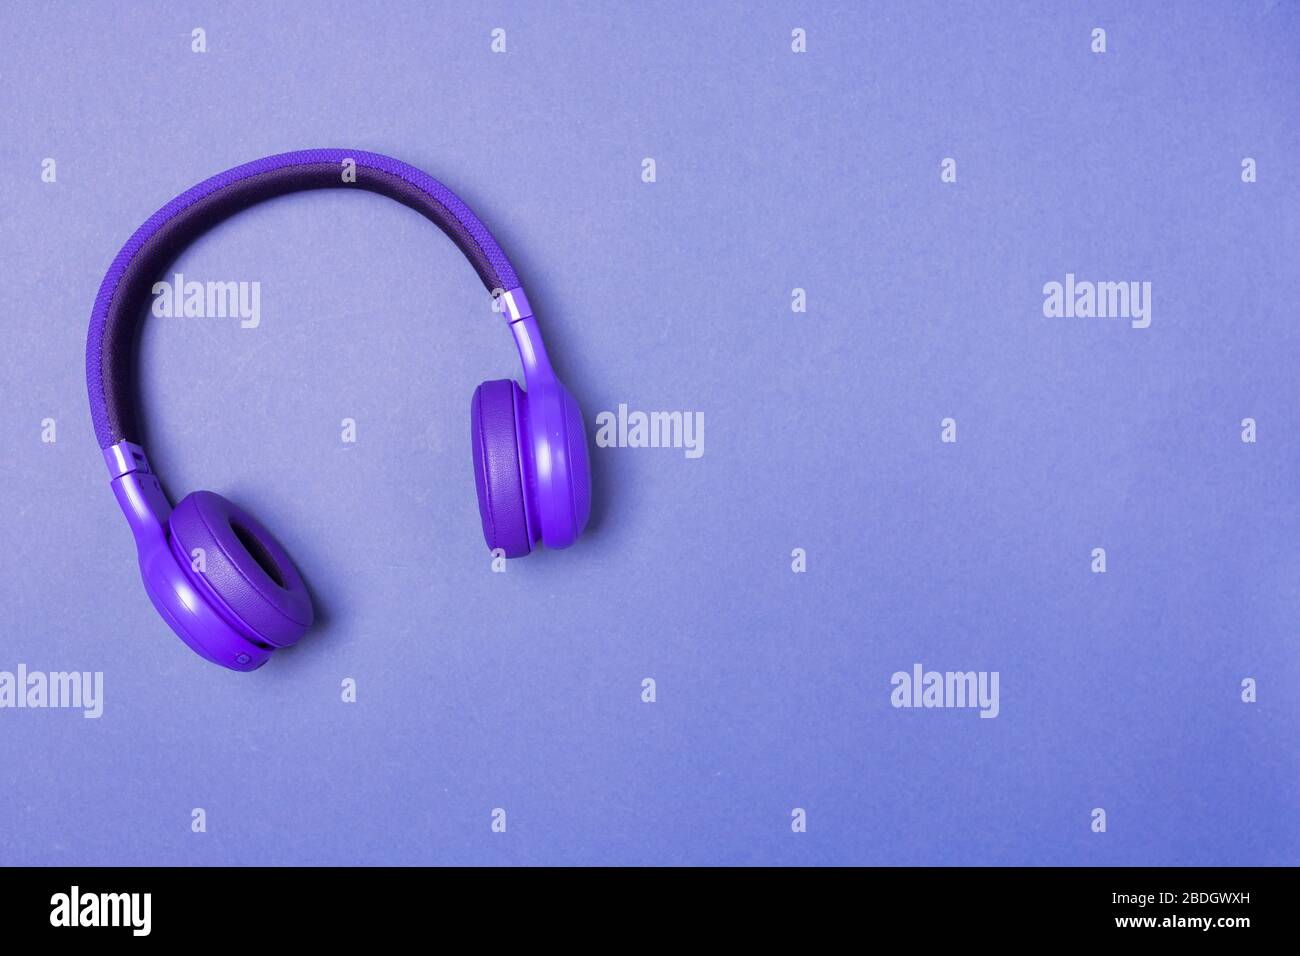 Purple headphones on purple background, top view. Space for text. Stock Photo